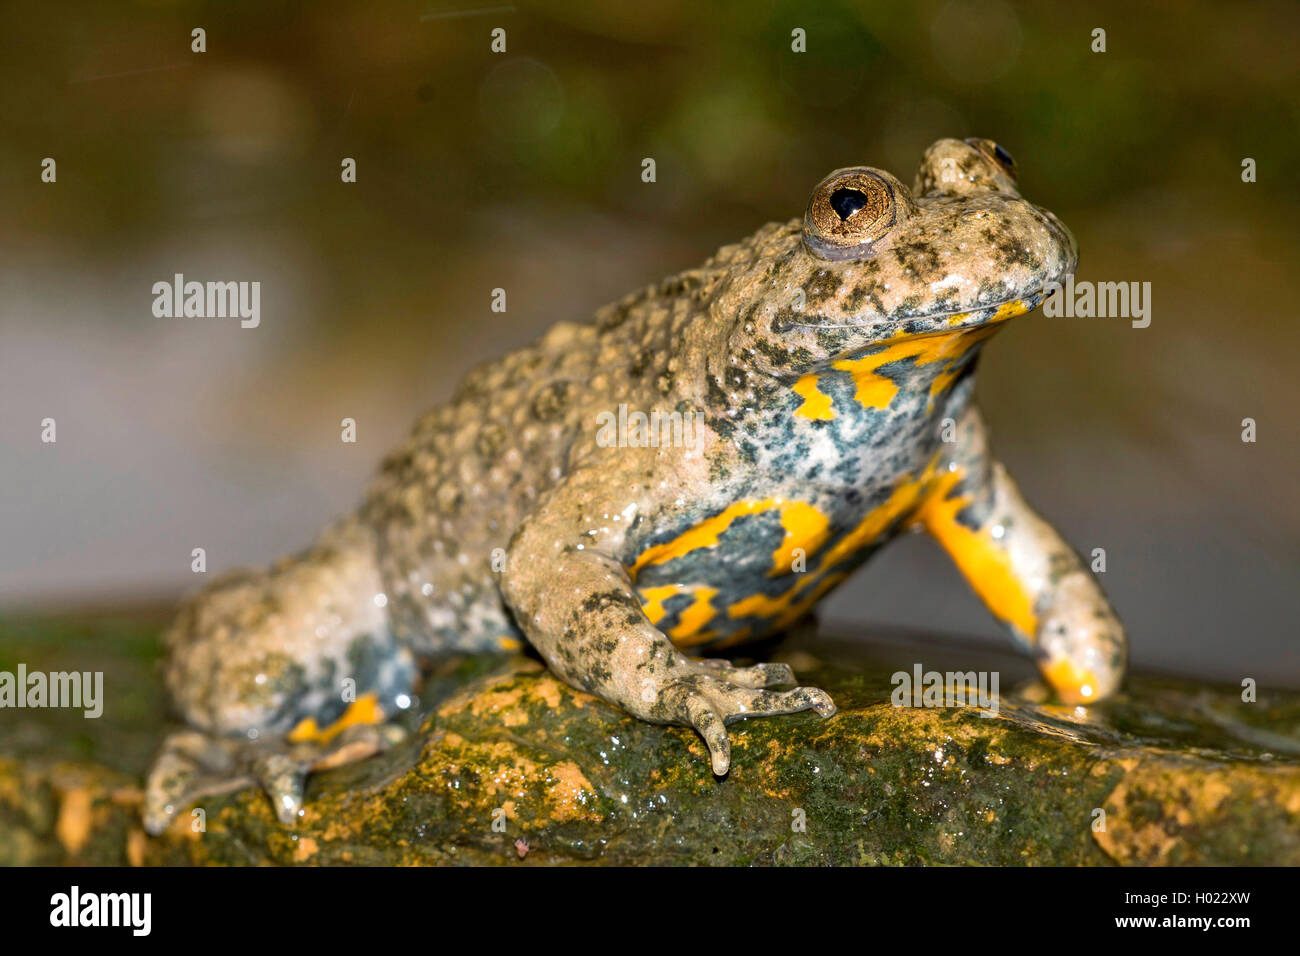 yellow-bellied toad, yellowbelly toad, variegated fire-toad (Bombina variegata), on a stone on the shore, Germany Stock Photo